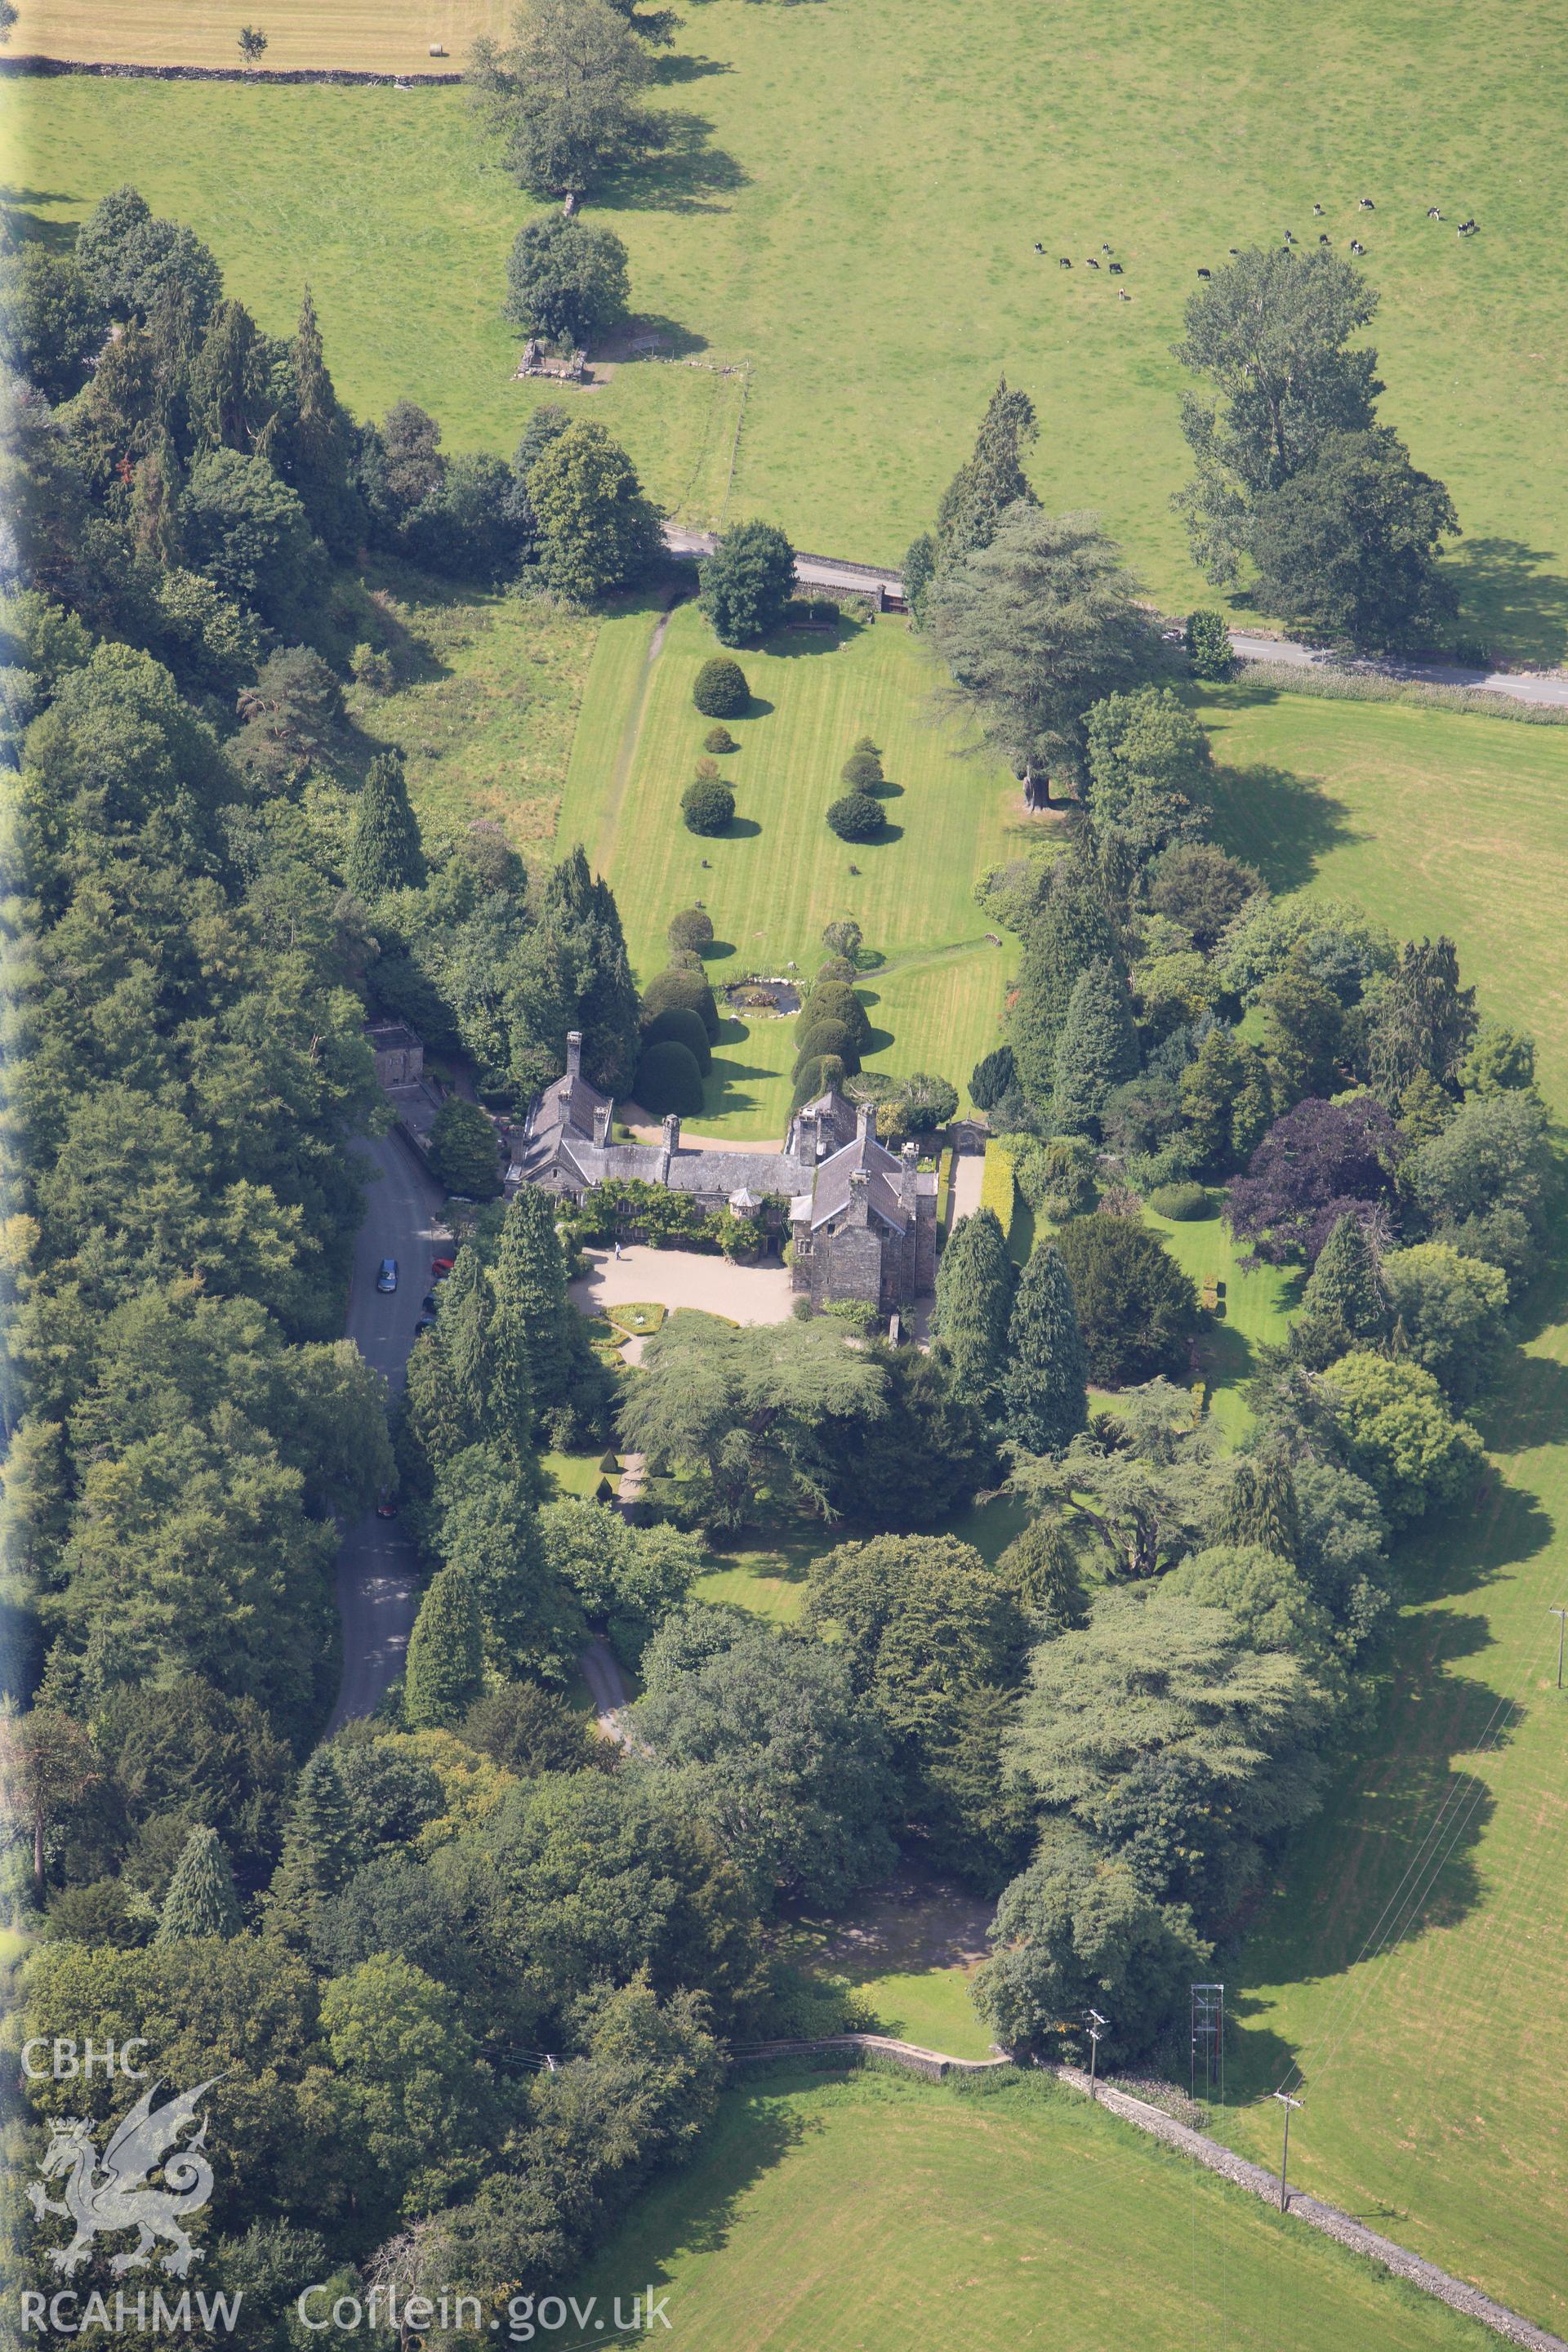 RCAHMW colour oblique photograph of Gwydir Castle, viewed from the south-east. Taken by Toby Driver on 10/08/2012.